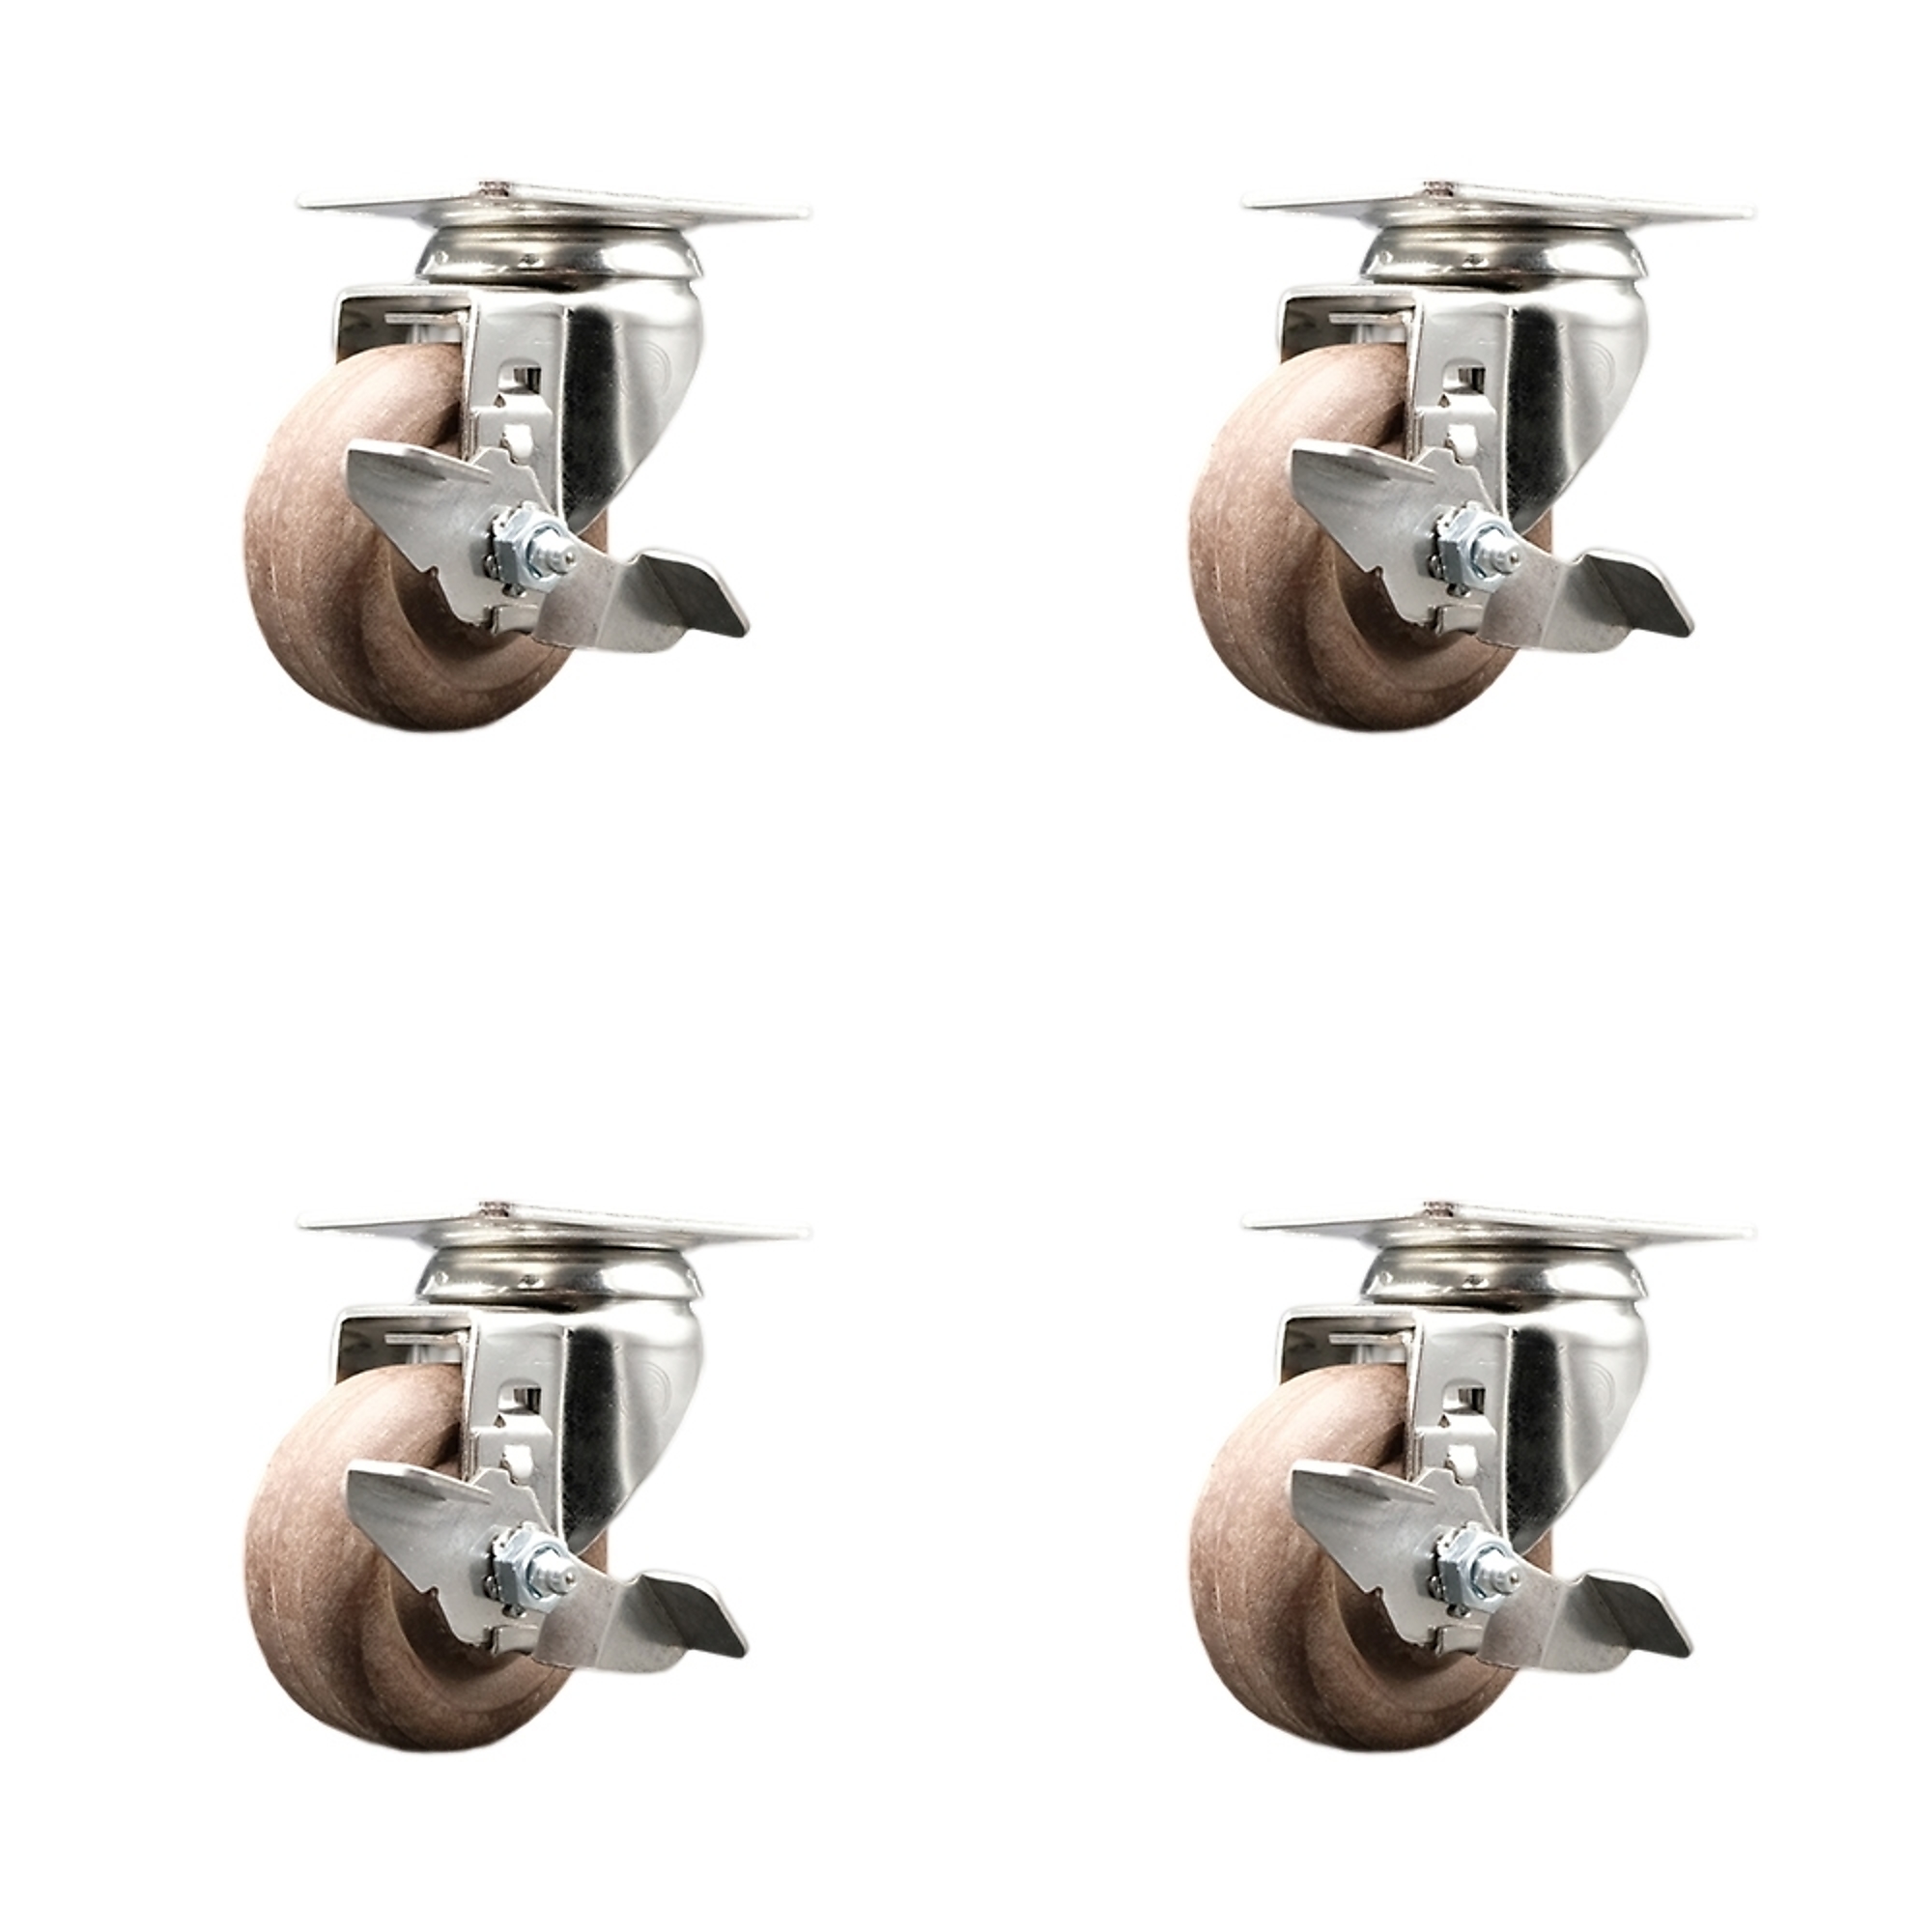 Service Caster, 3 1/2Inch x 1 1/4Inch Plate Casters, Wheel Diameter 3.5 in, Caster Type Swivel, Package (qty.) 4, Model SCC-SS31620S3514-GFNSHT-TLB-4